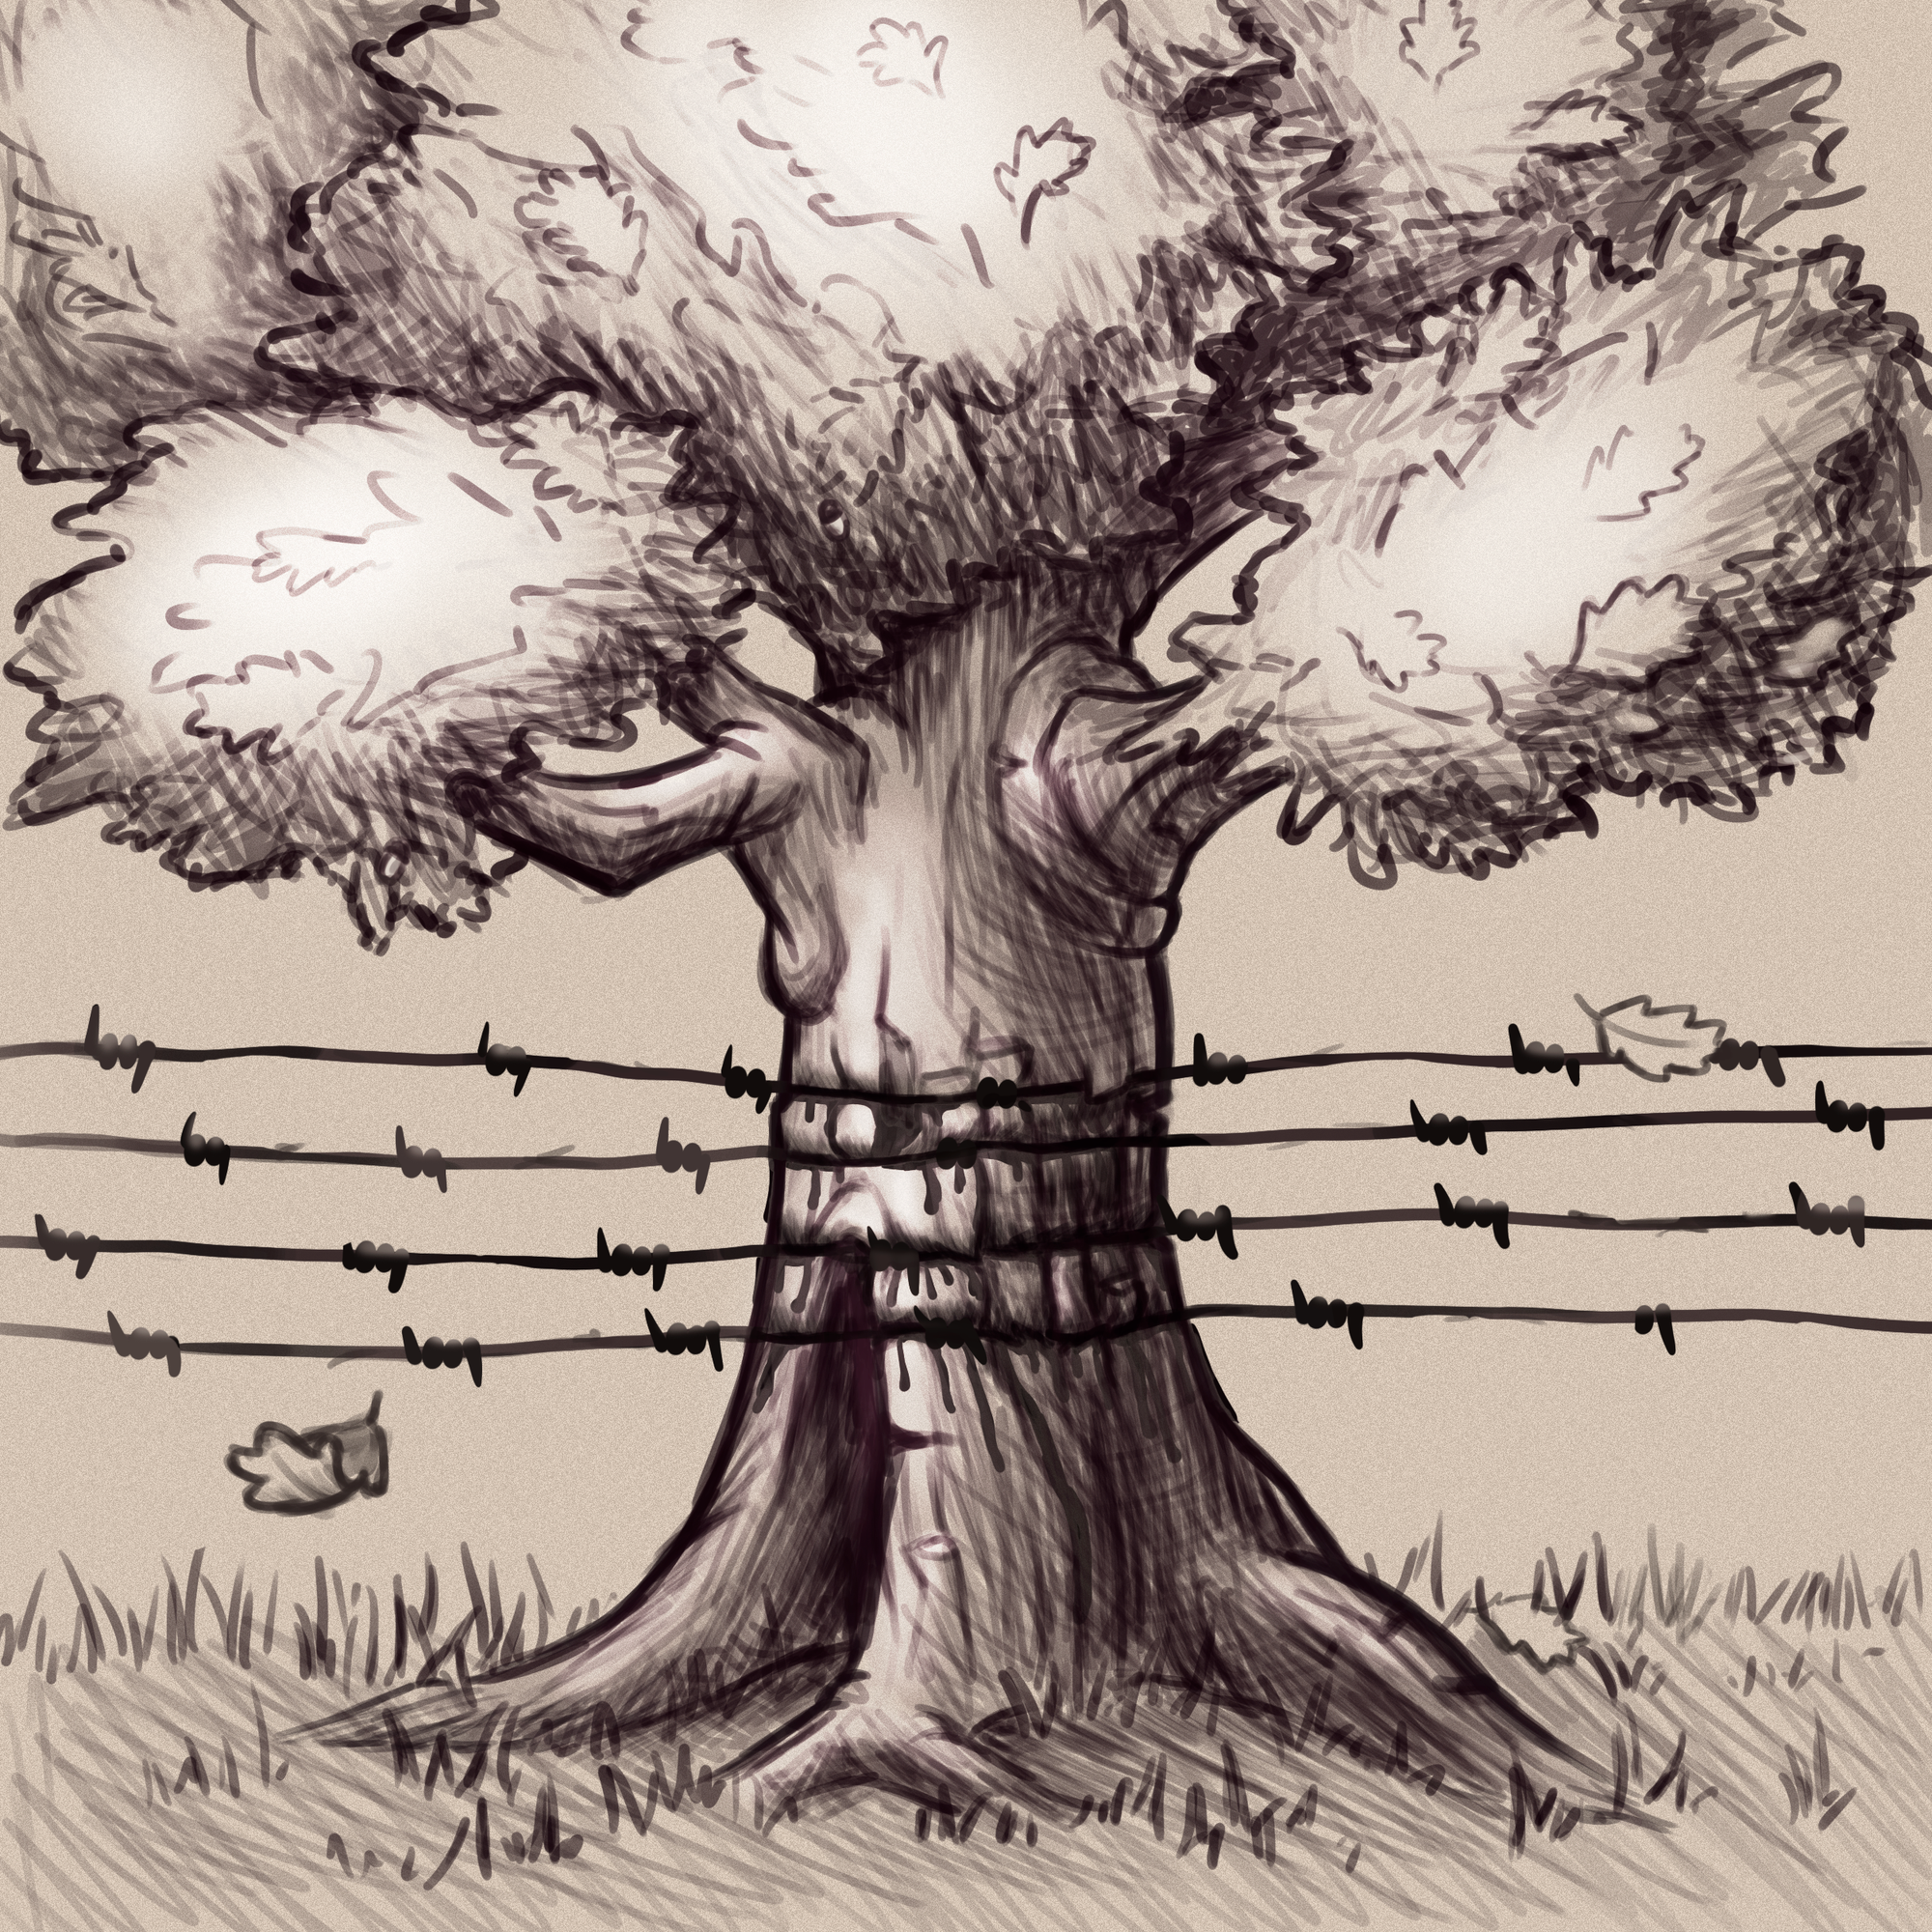 greyscale sketch of an oak tree cut into by barbed wire.